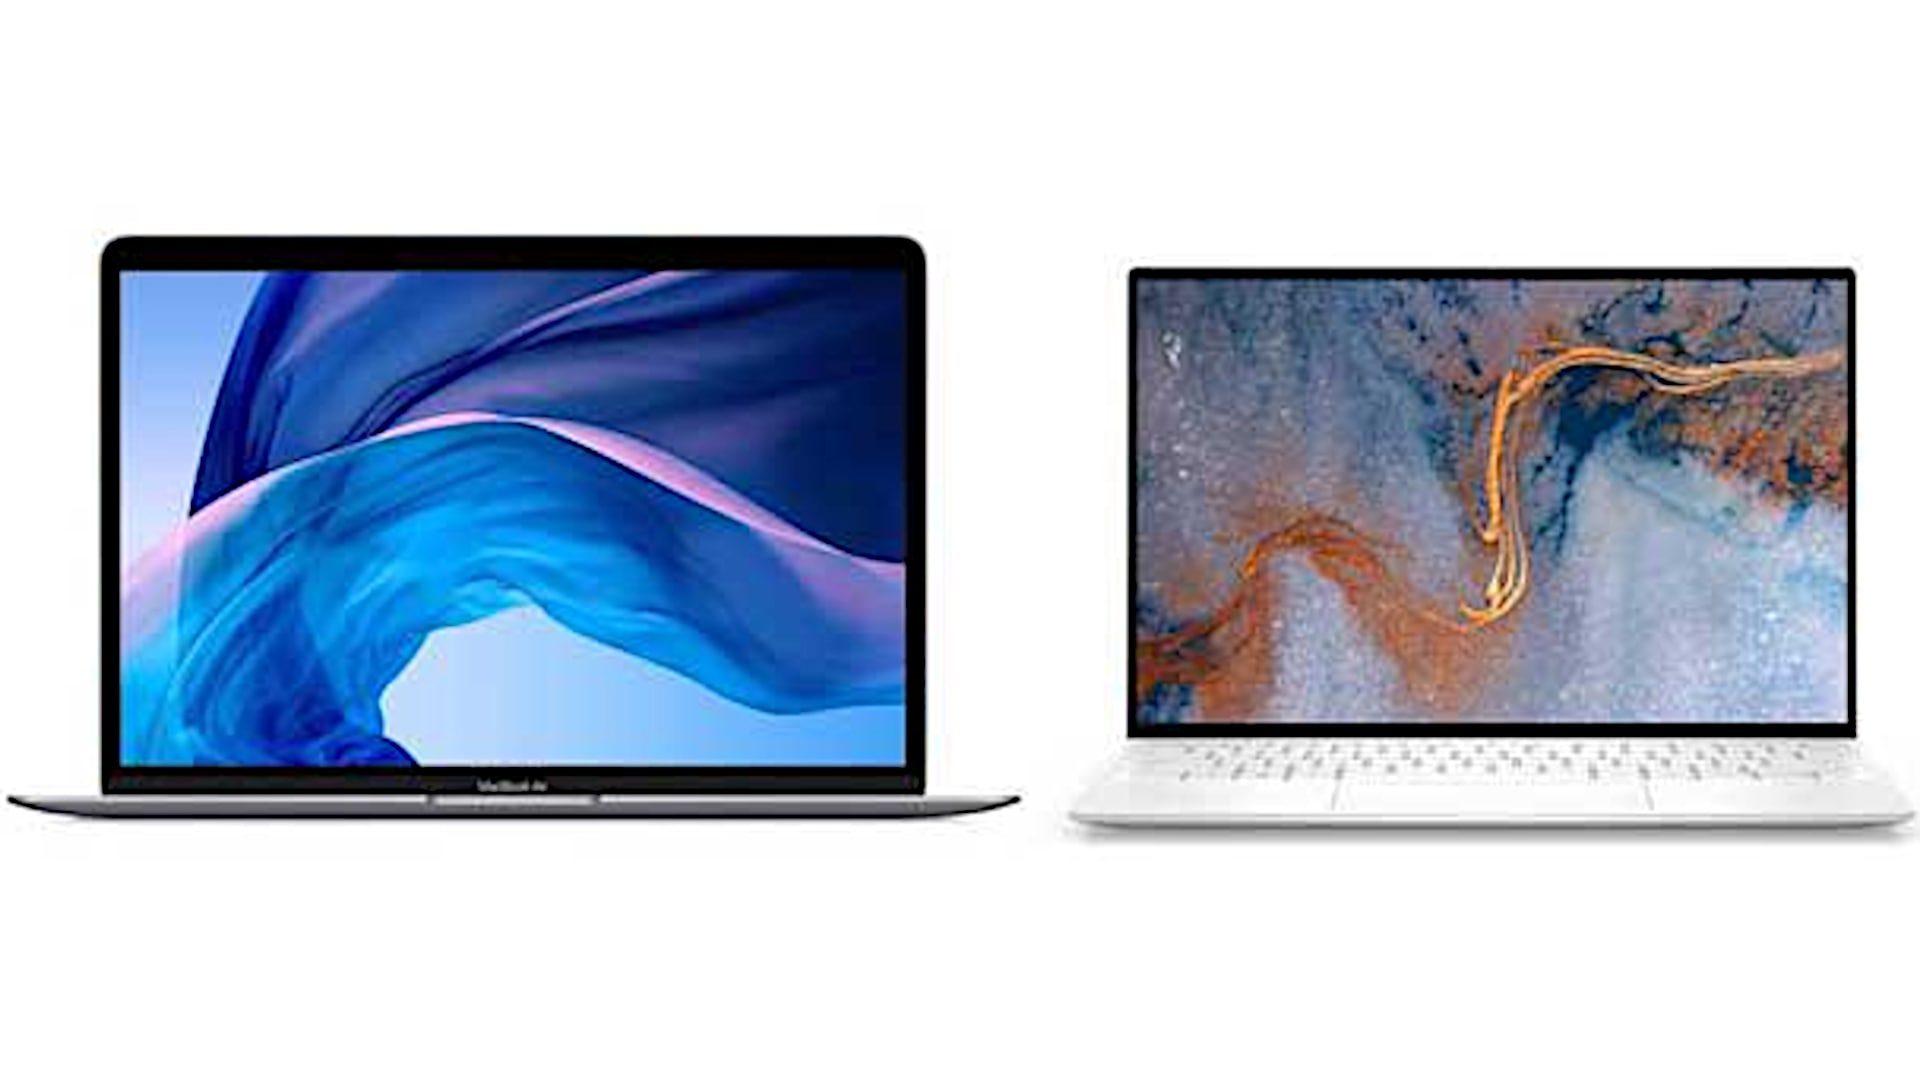 You are currently viewing APPLE MacBook Air vs DELL XPS 13 9300 (2020) Comparison